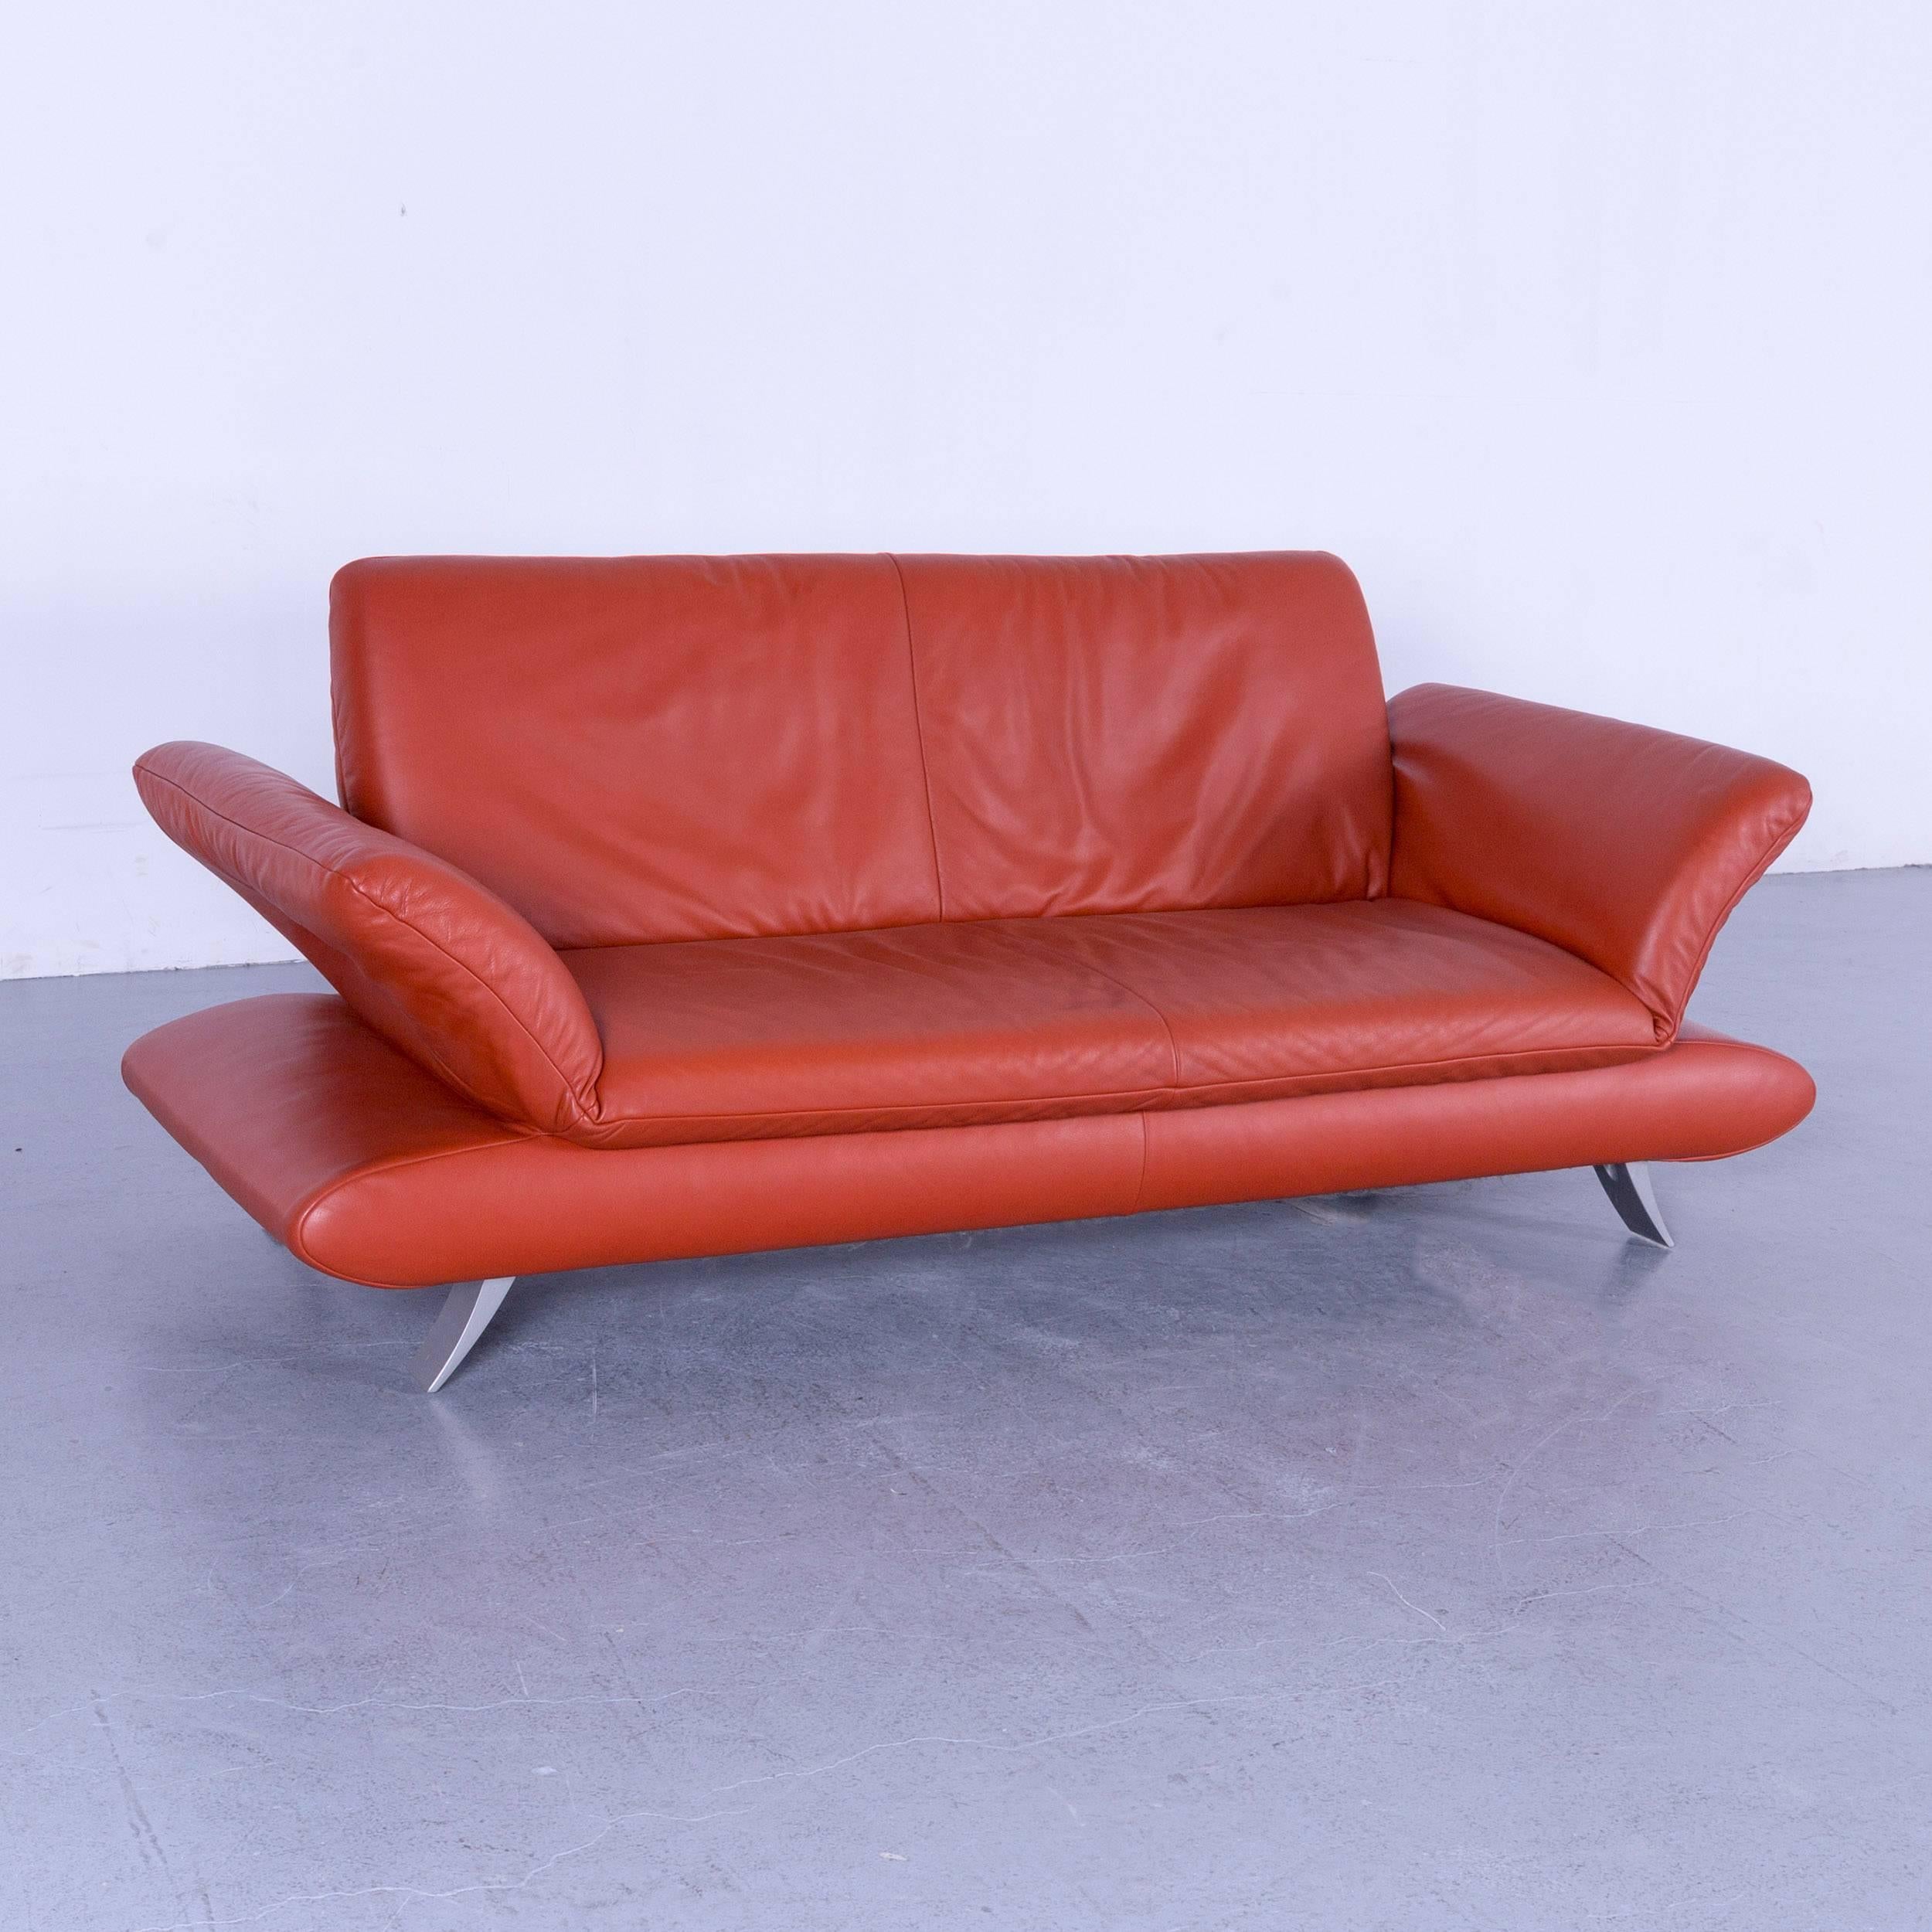 Koinor Rossini designer leather sofa in stunning orange with functions, Germany.